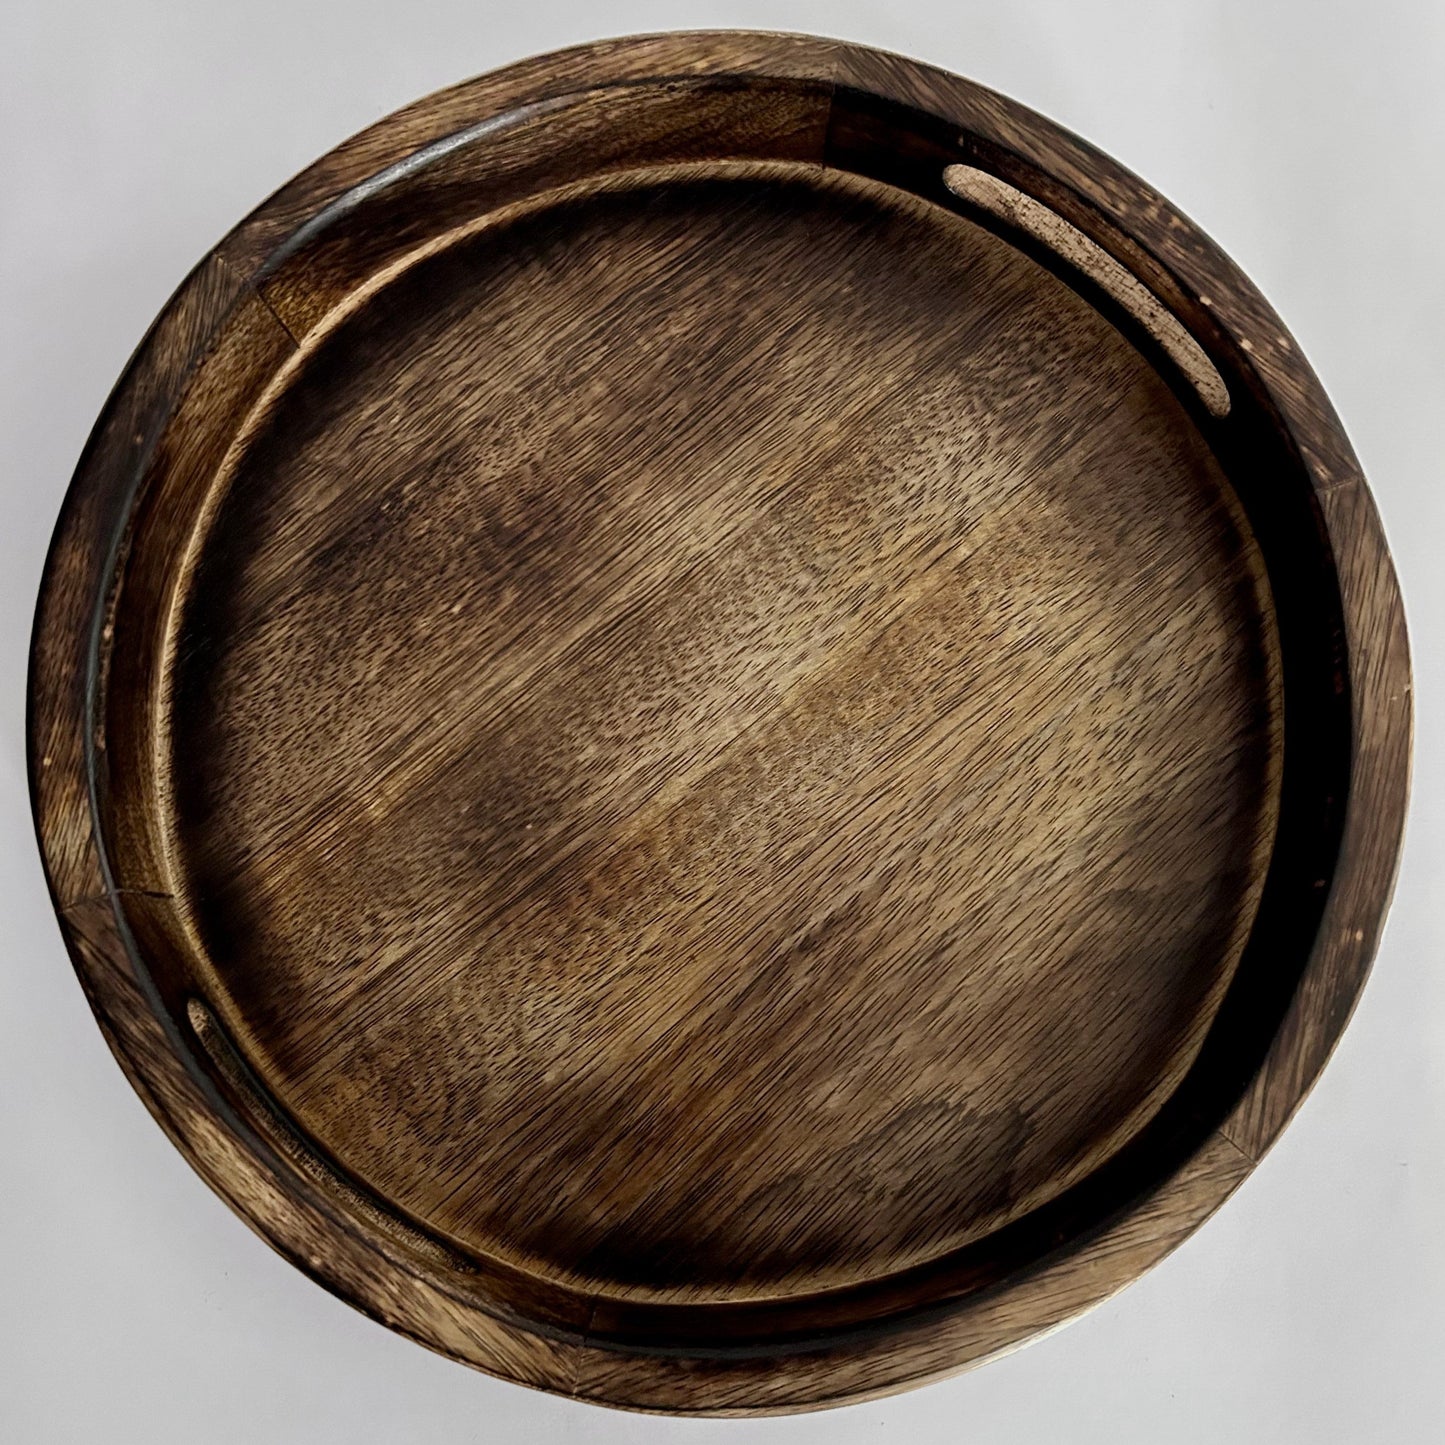 LEMONGINGER Wooden Round Tray for Serving | Breakfast Tea Coffee Serving Trays | Serving Tray for Bed Coffee, Snacks